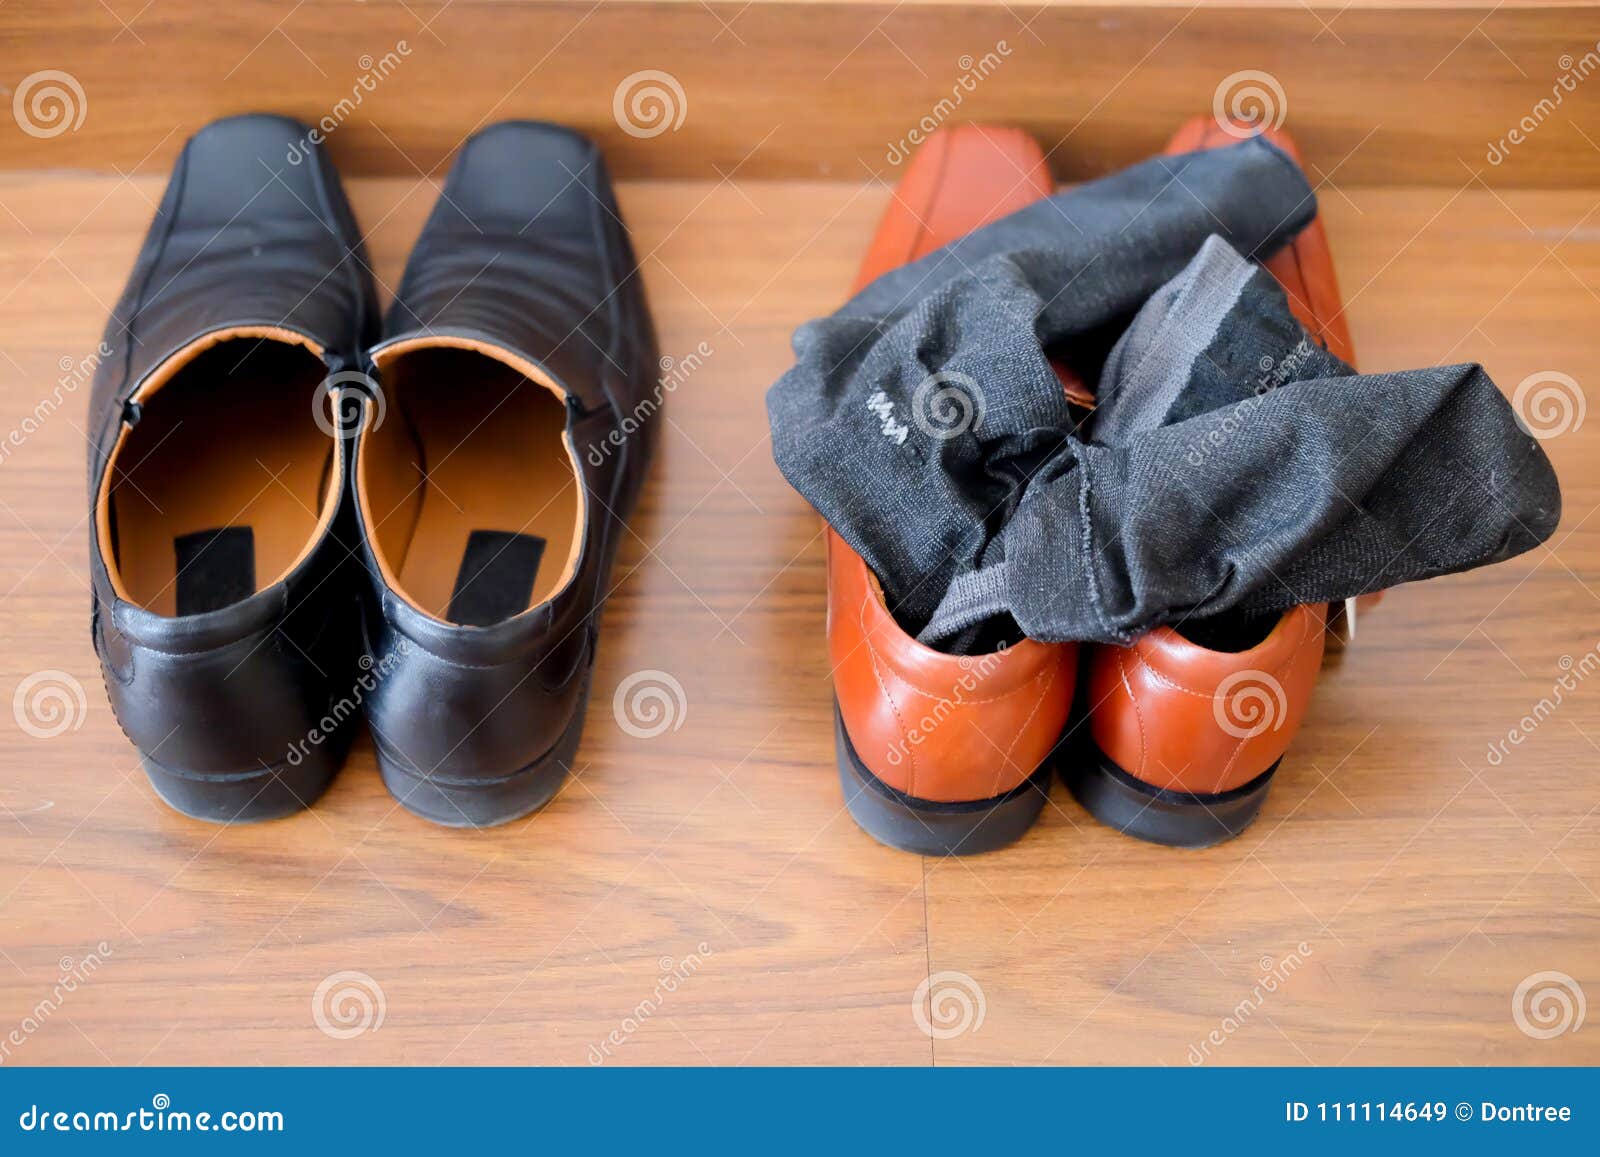 Black Shoes and Brown Male Shoes with Socks Stock Image - Image of male ...